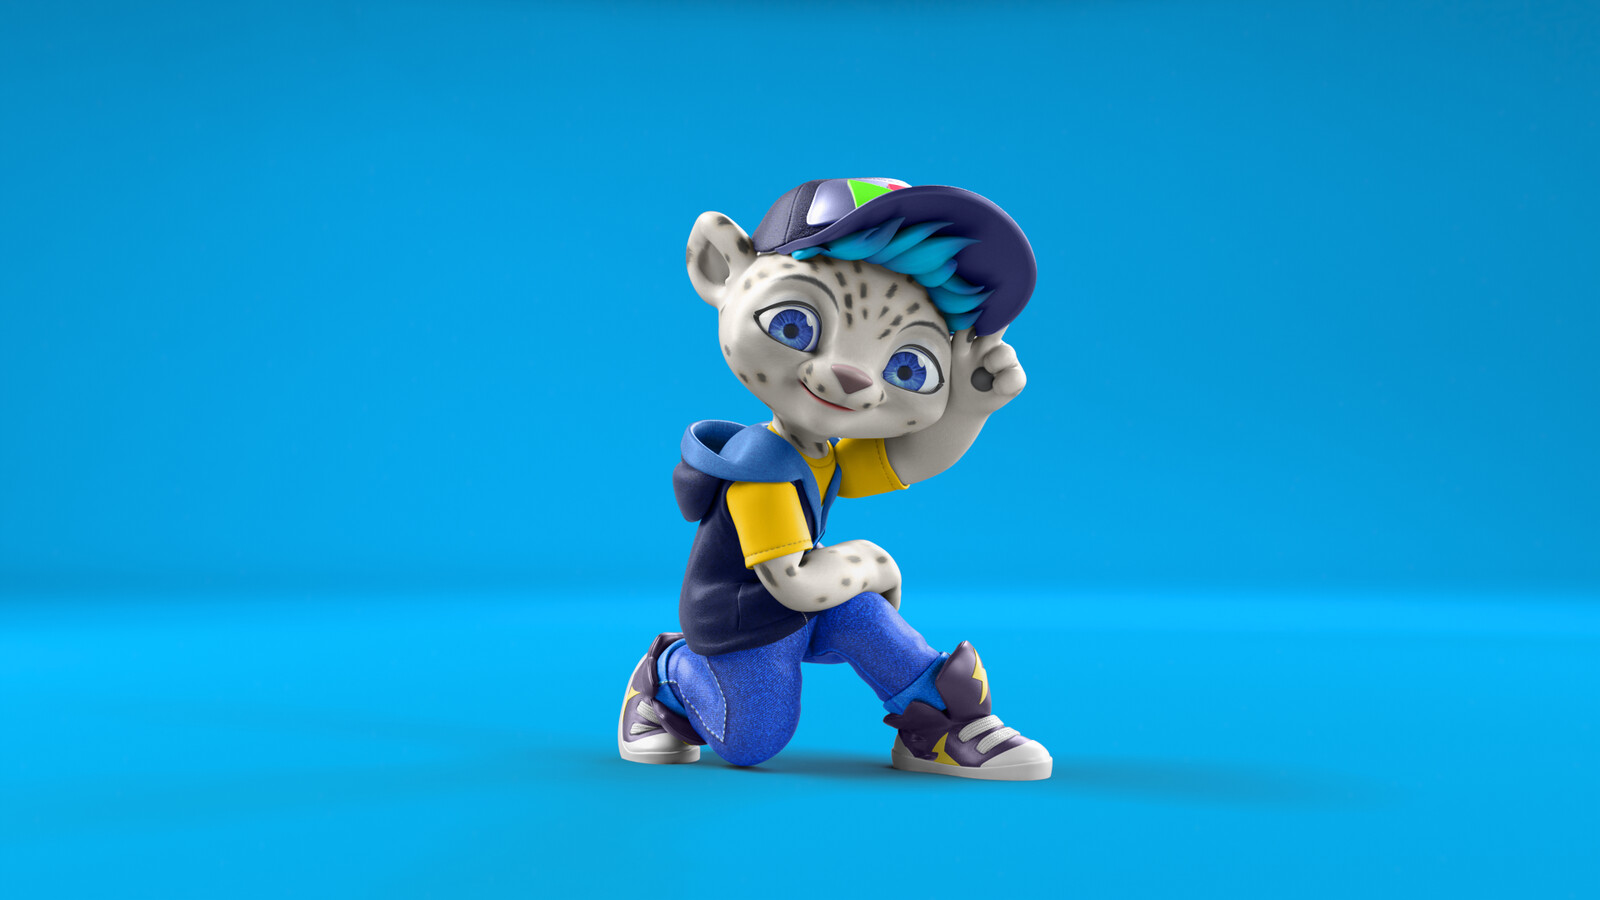 This was an advertising image to showcase the character Freeze holding his hat.